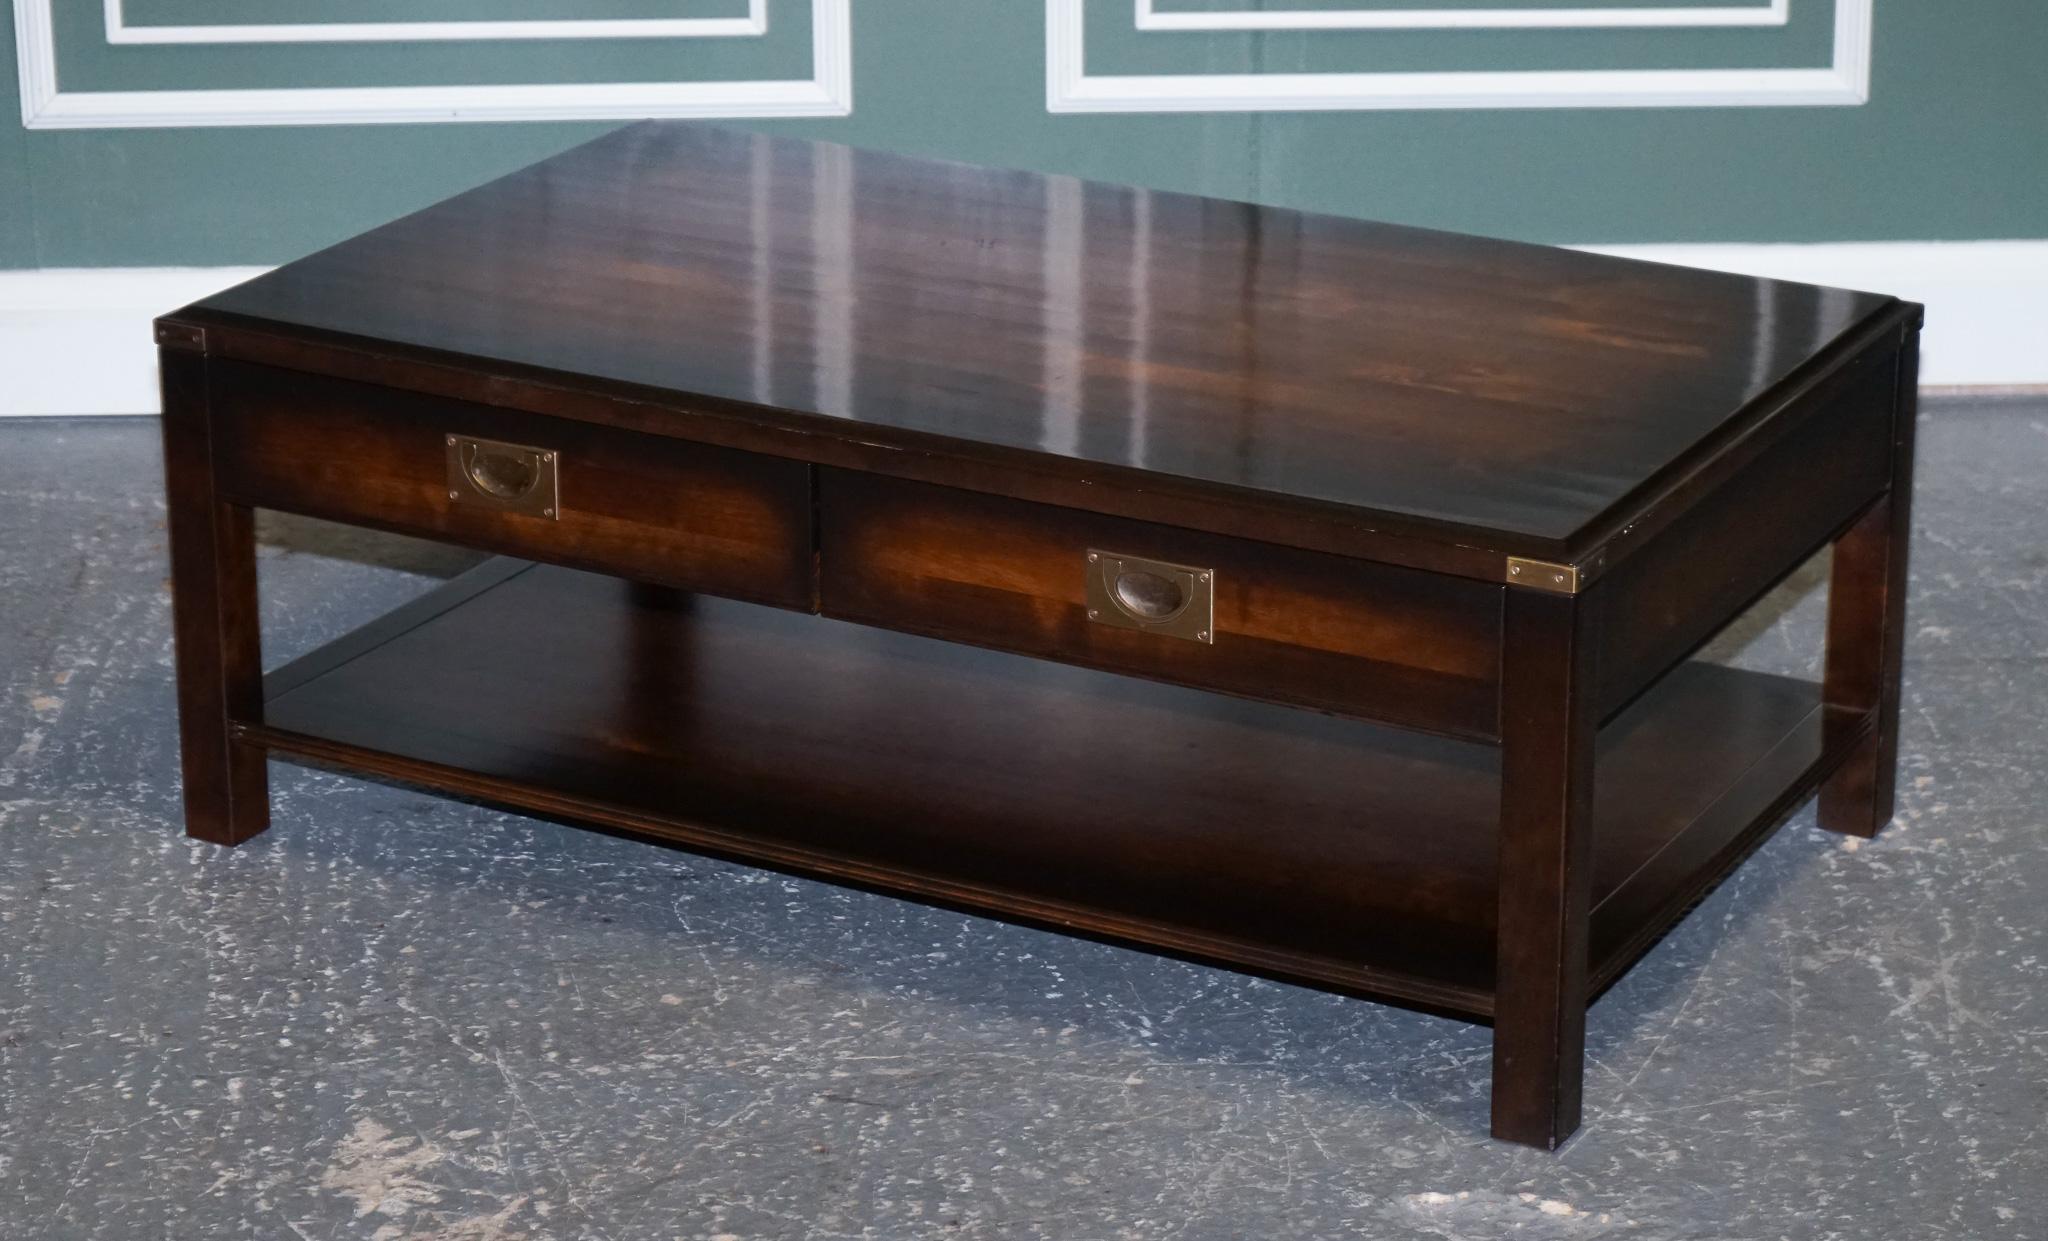 We are so excited to present to you this stunning vintage military campaign mahogany & brass coffee table.

The table has been retailed by John Lewis, you can see the plaque in one of the drawers.
Very good-looking piece with 2 drawers which work